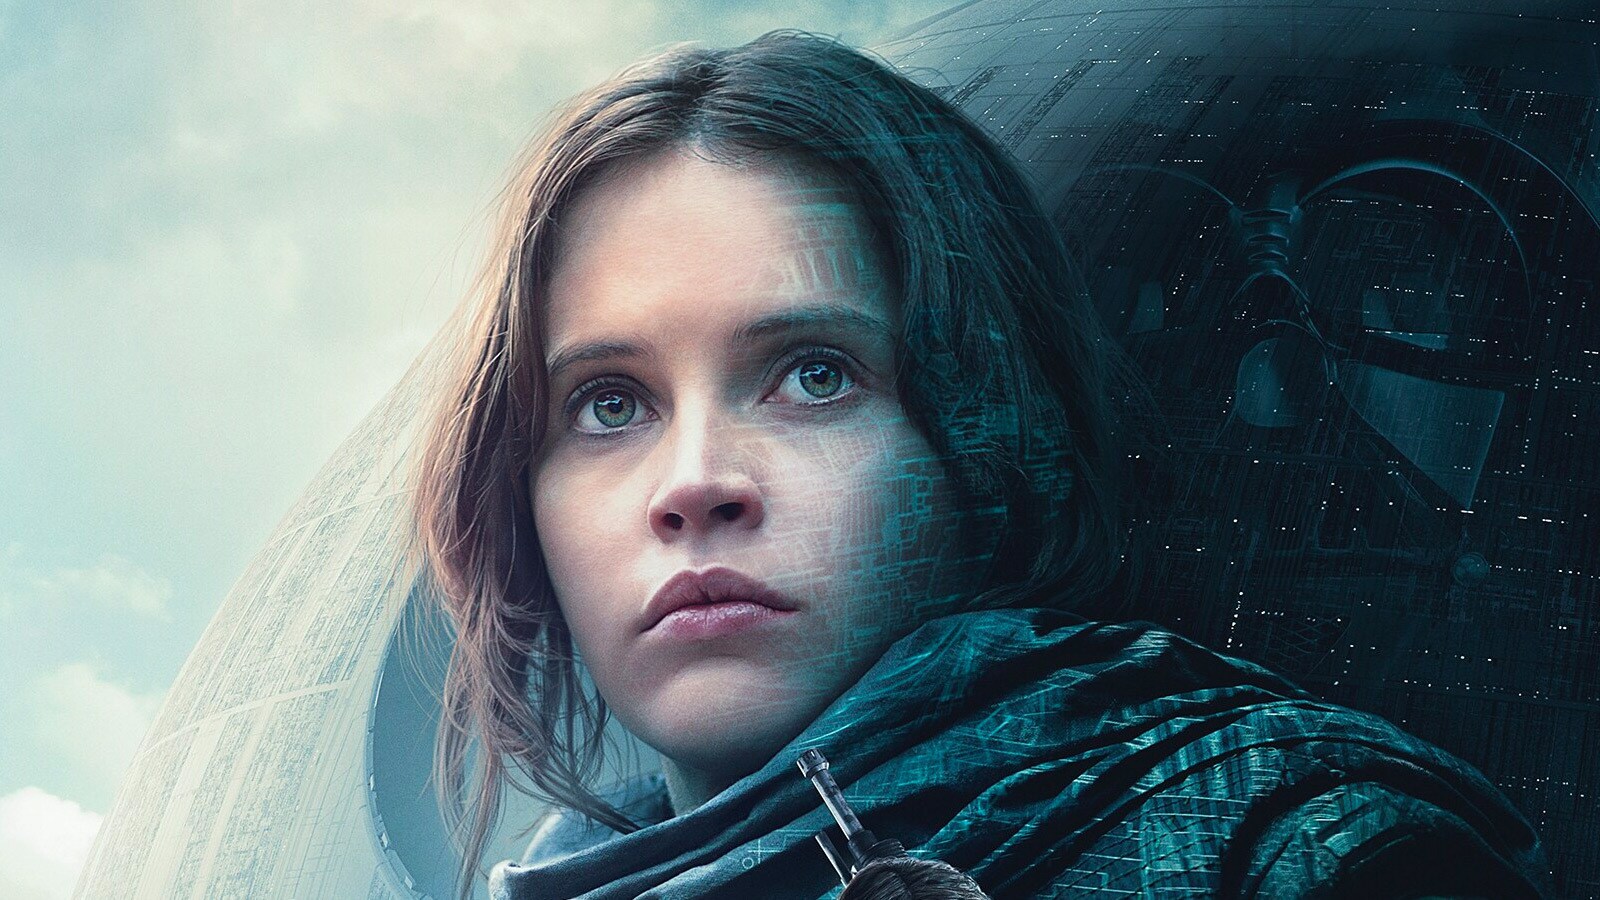 Rogue One: A Star Wars Story Poster Revealed and Trailer Announced on The Star Wars Show